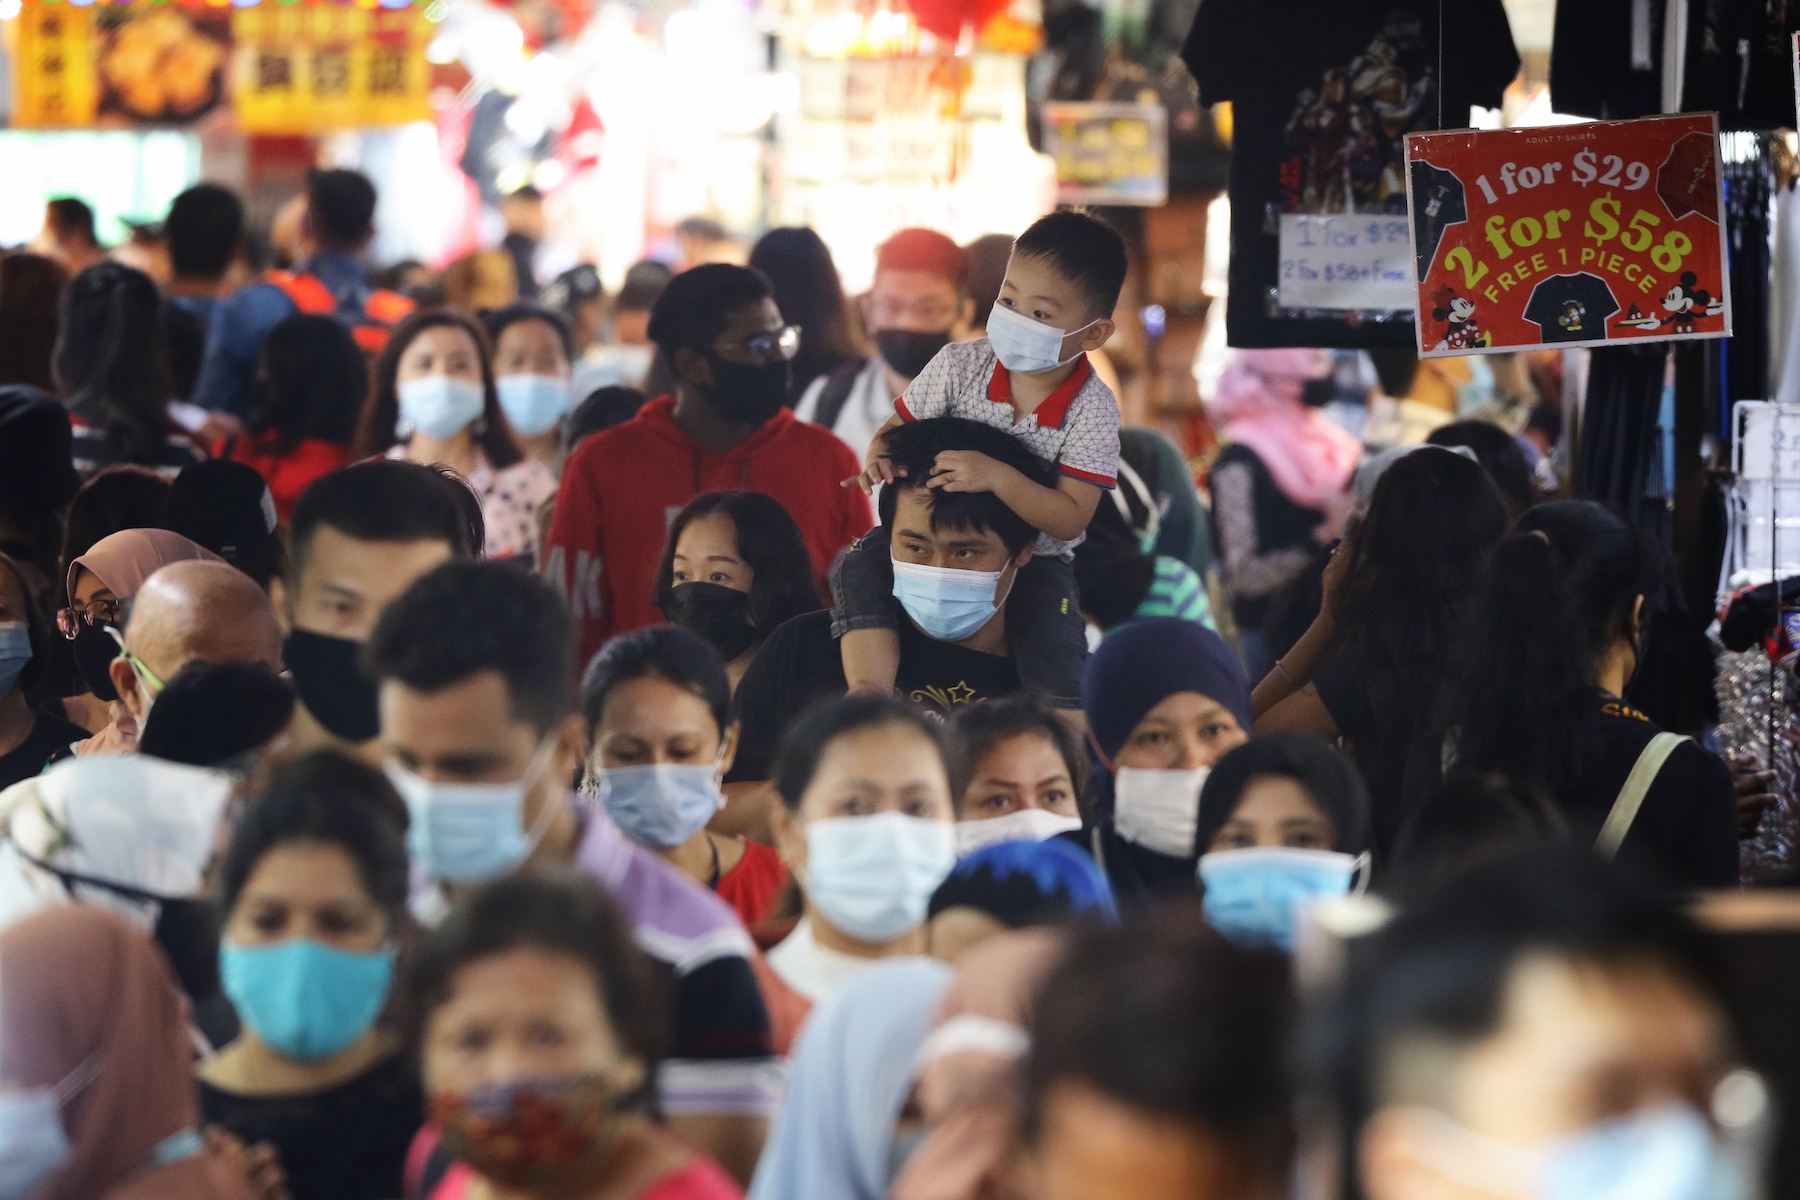 A crowded Singapore street in a market district where everyone is wearing a protective face mask
